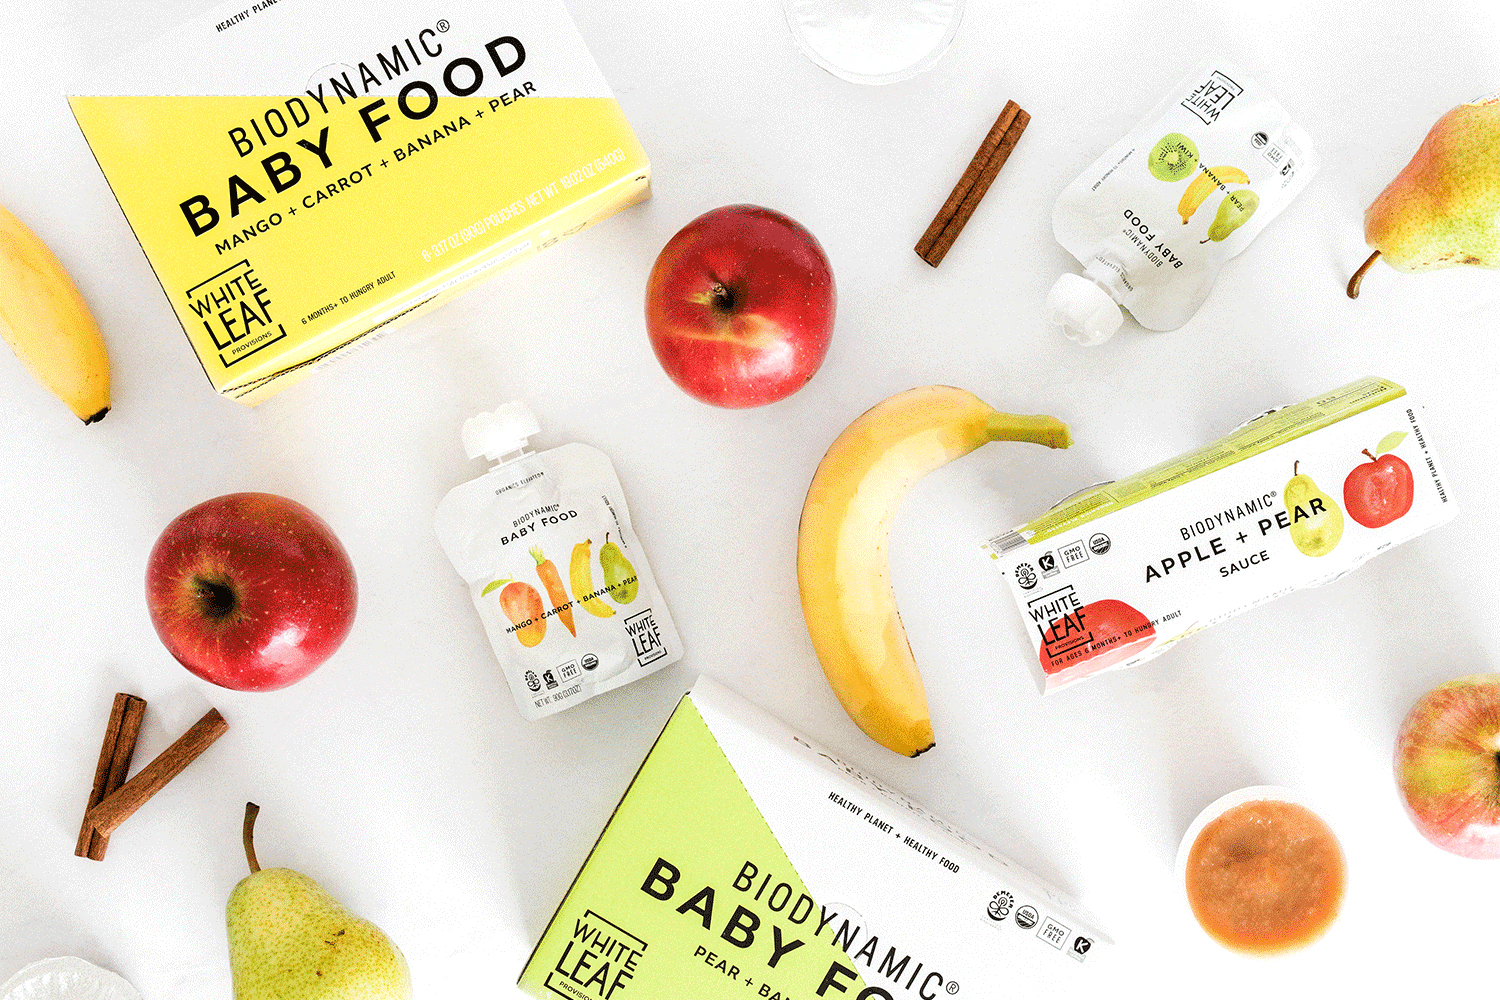 Watercolor Illustrations and a Clean Look Make This Organic Baby Food Brand Stand Out